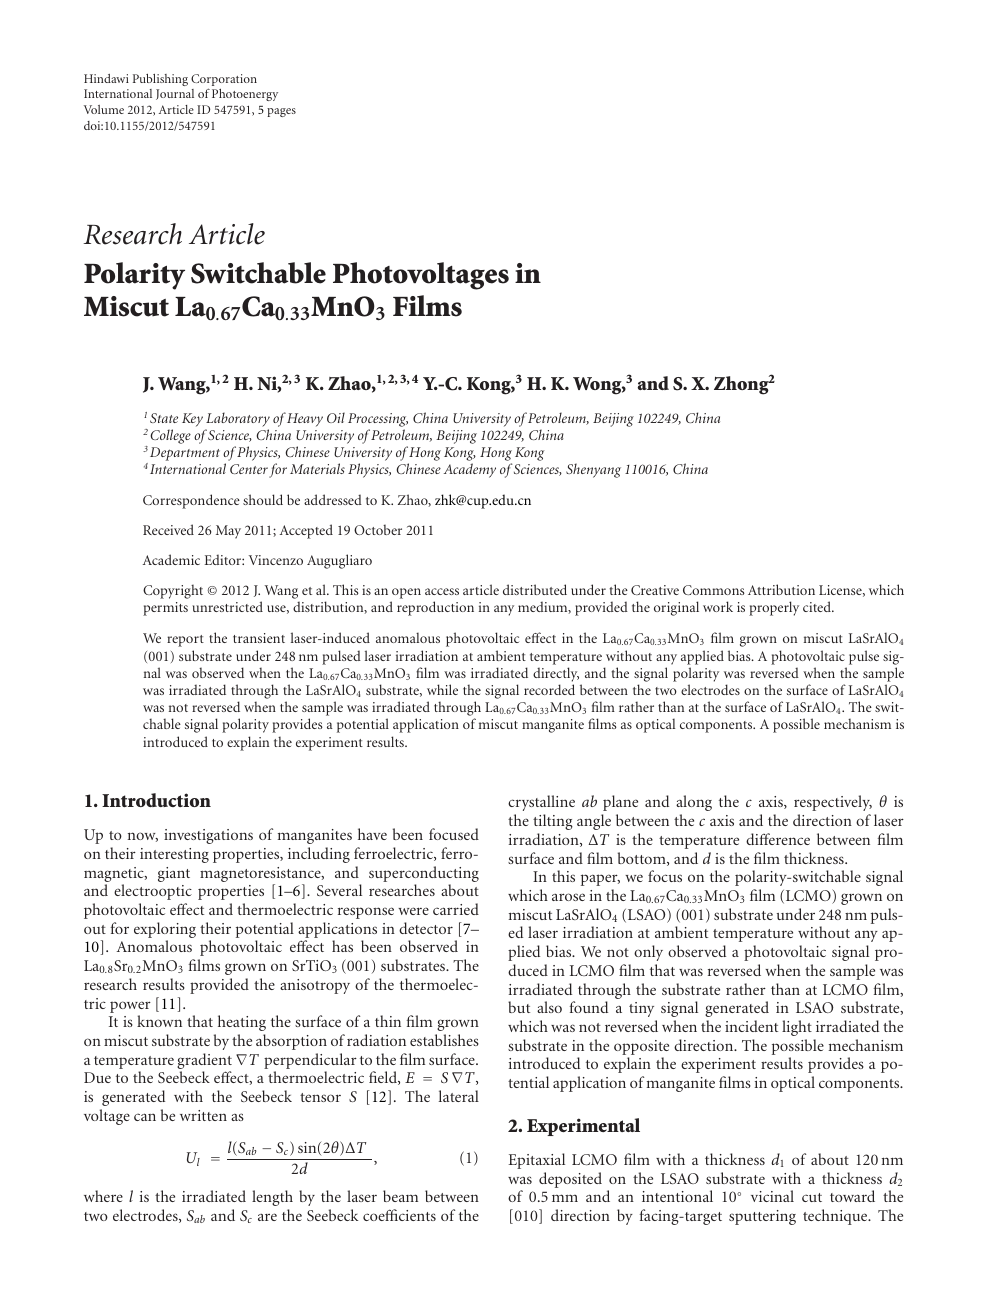 Polarity Switchable Photovoltages In Miscut La0 67ca0 33mno3 Films Topic Of Research Paper In Nano Technology Download Scholarly Article Pdf And Read For Free On Cyberleninka Open Science Hub